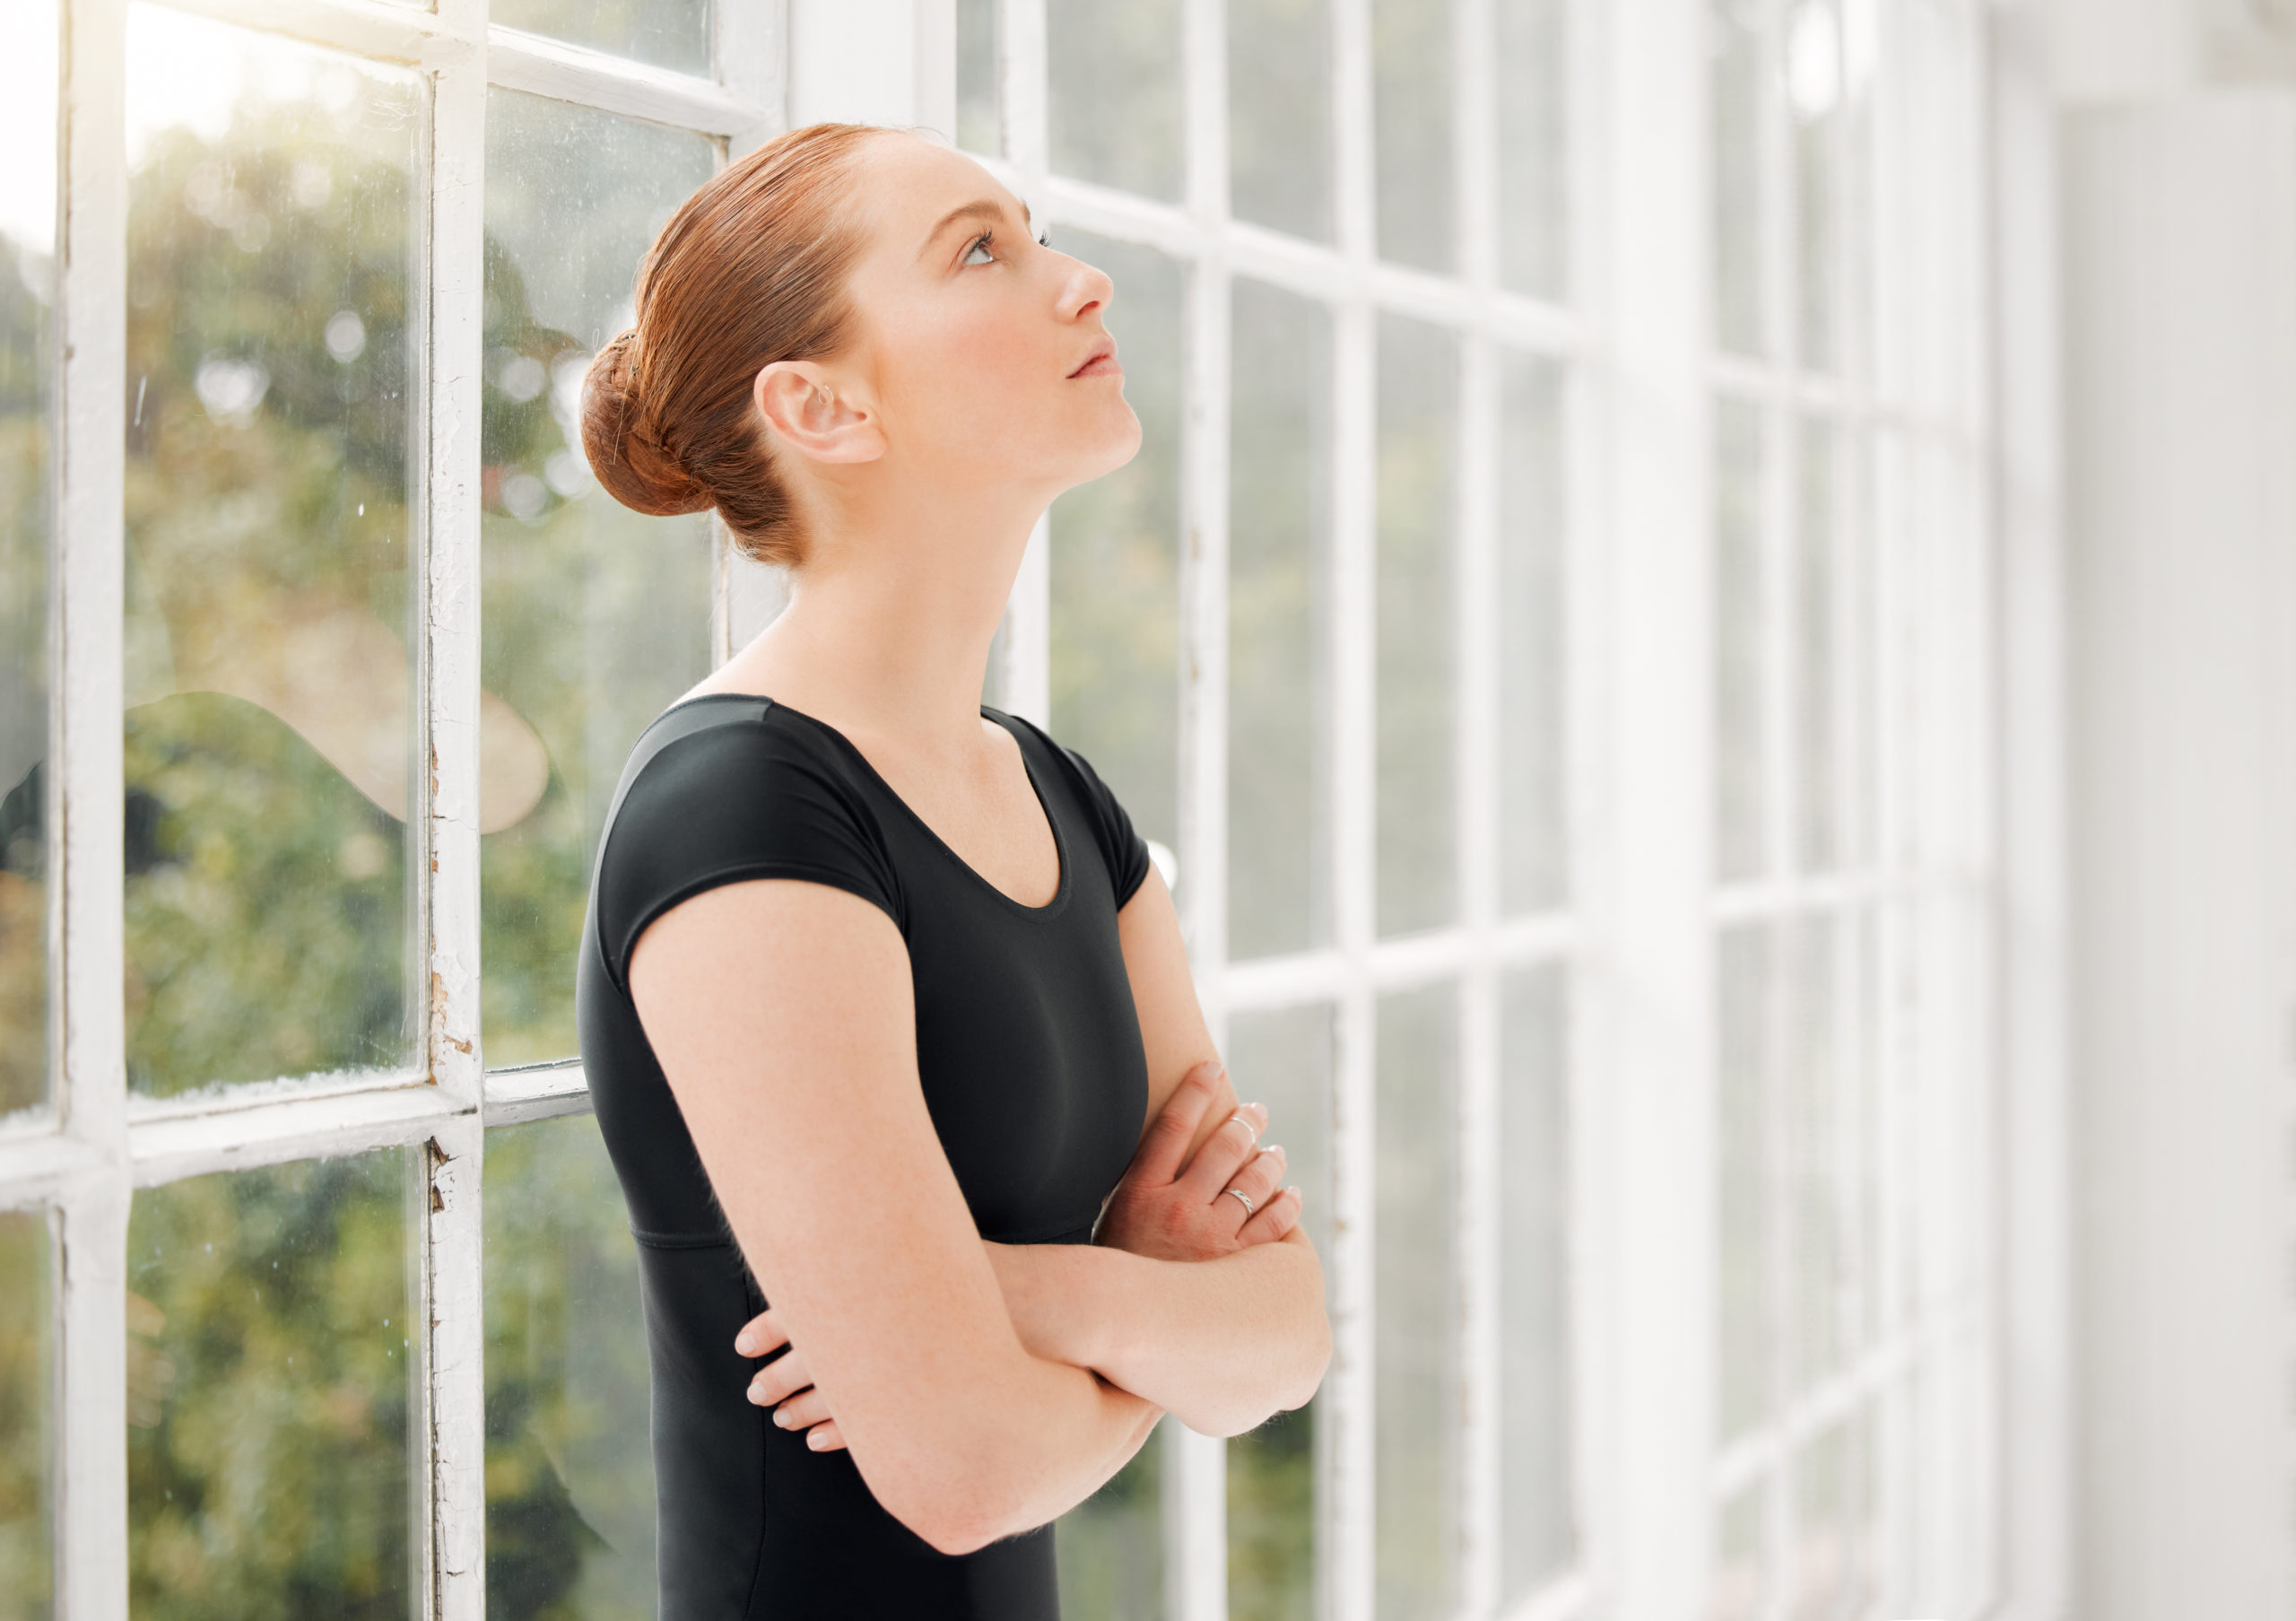 A female ballet dancer stands alone in front of a large windo, looking nervous and stressed